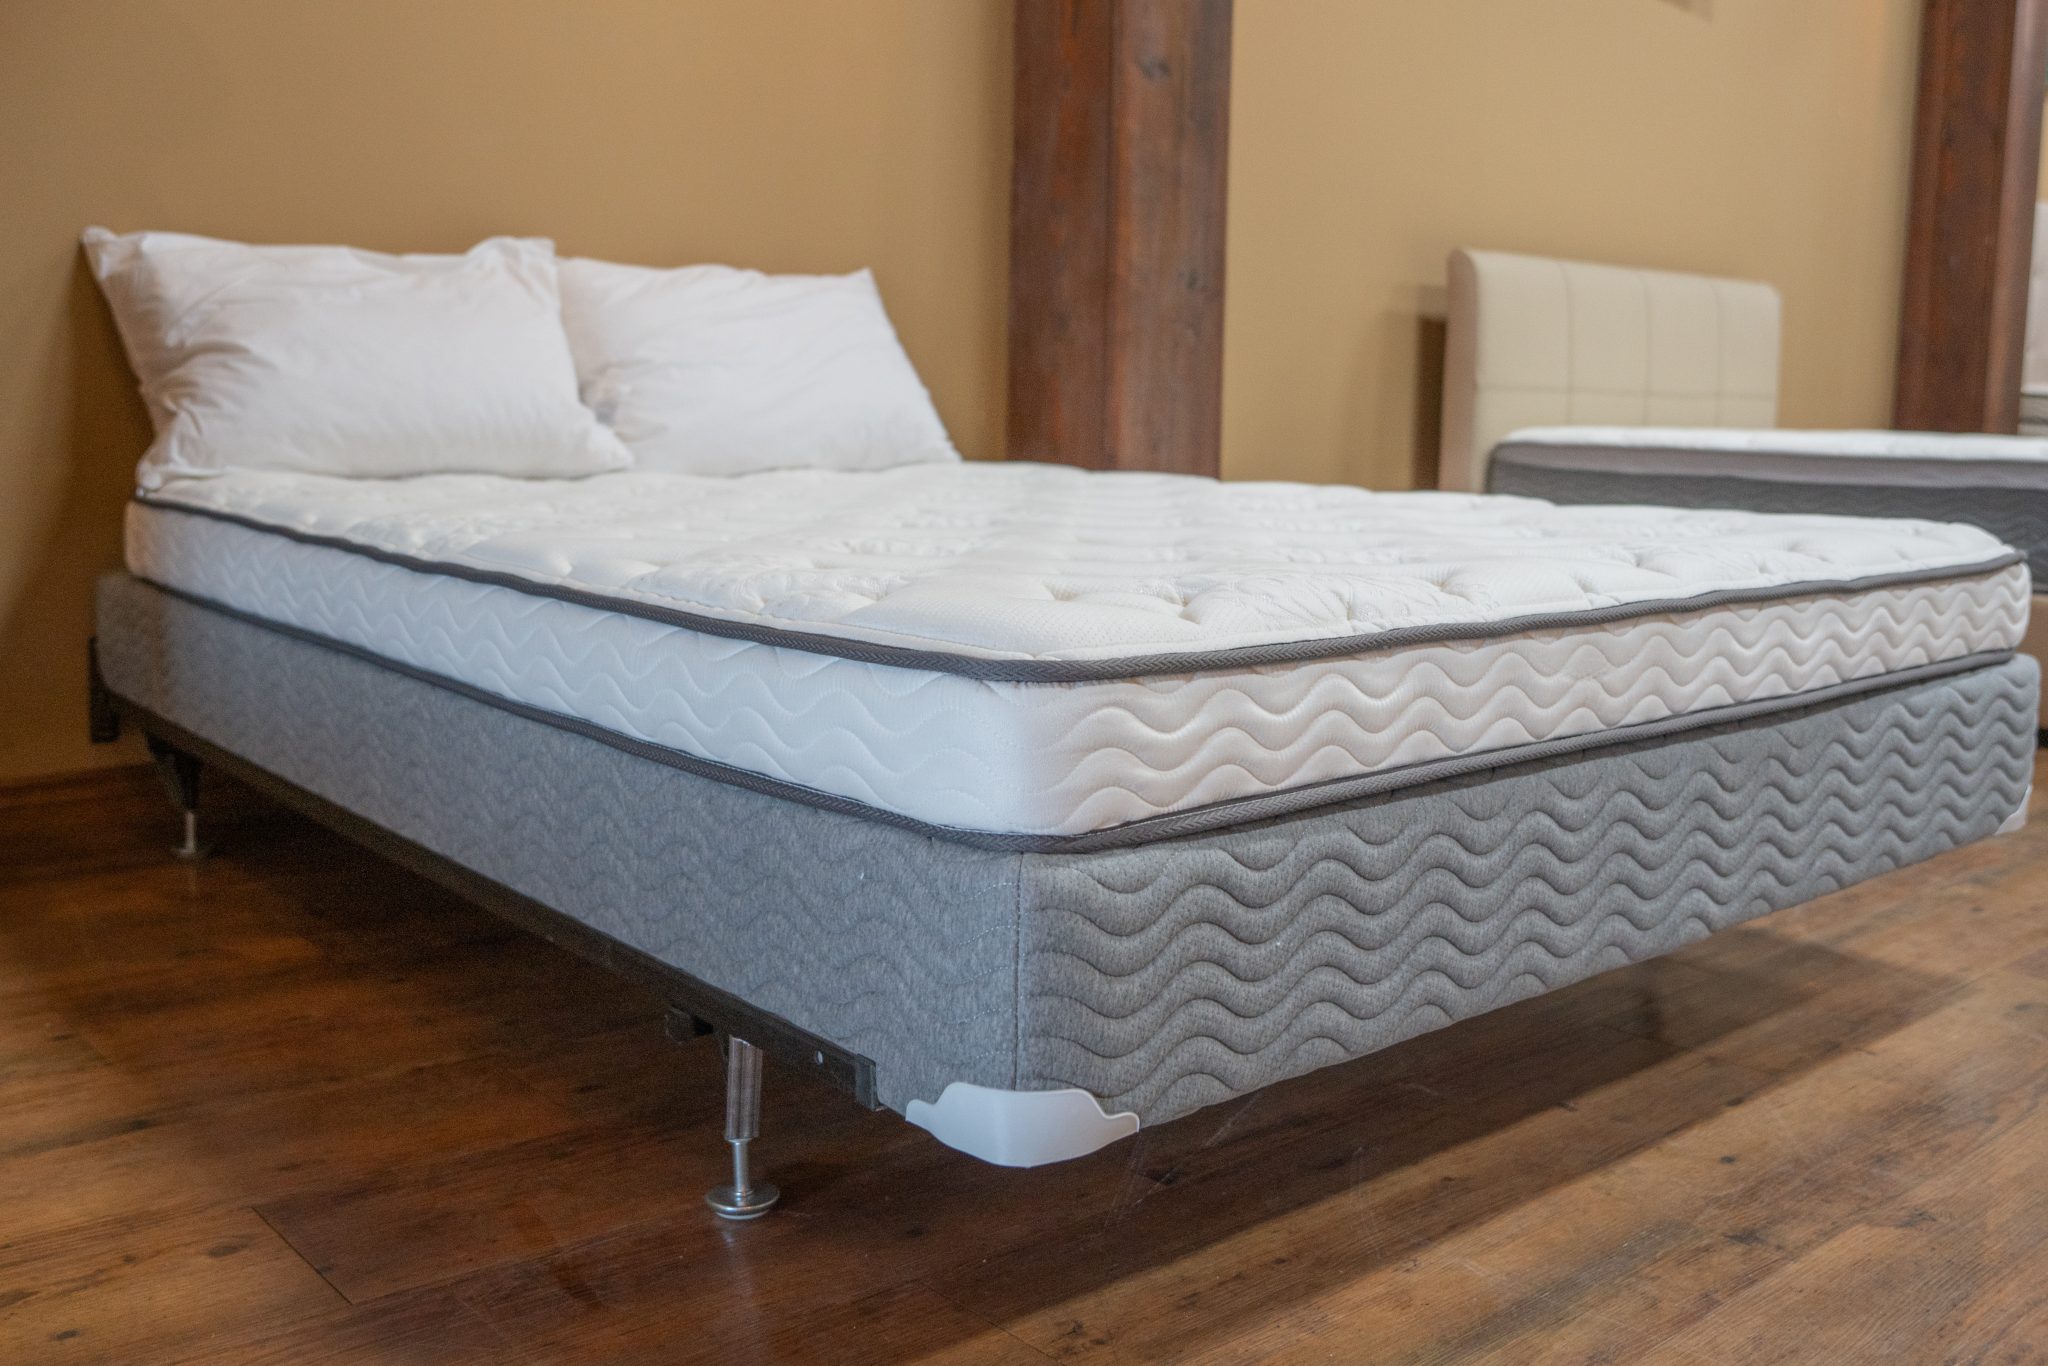 replacement hide a bed mattresses